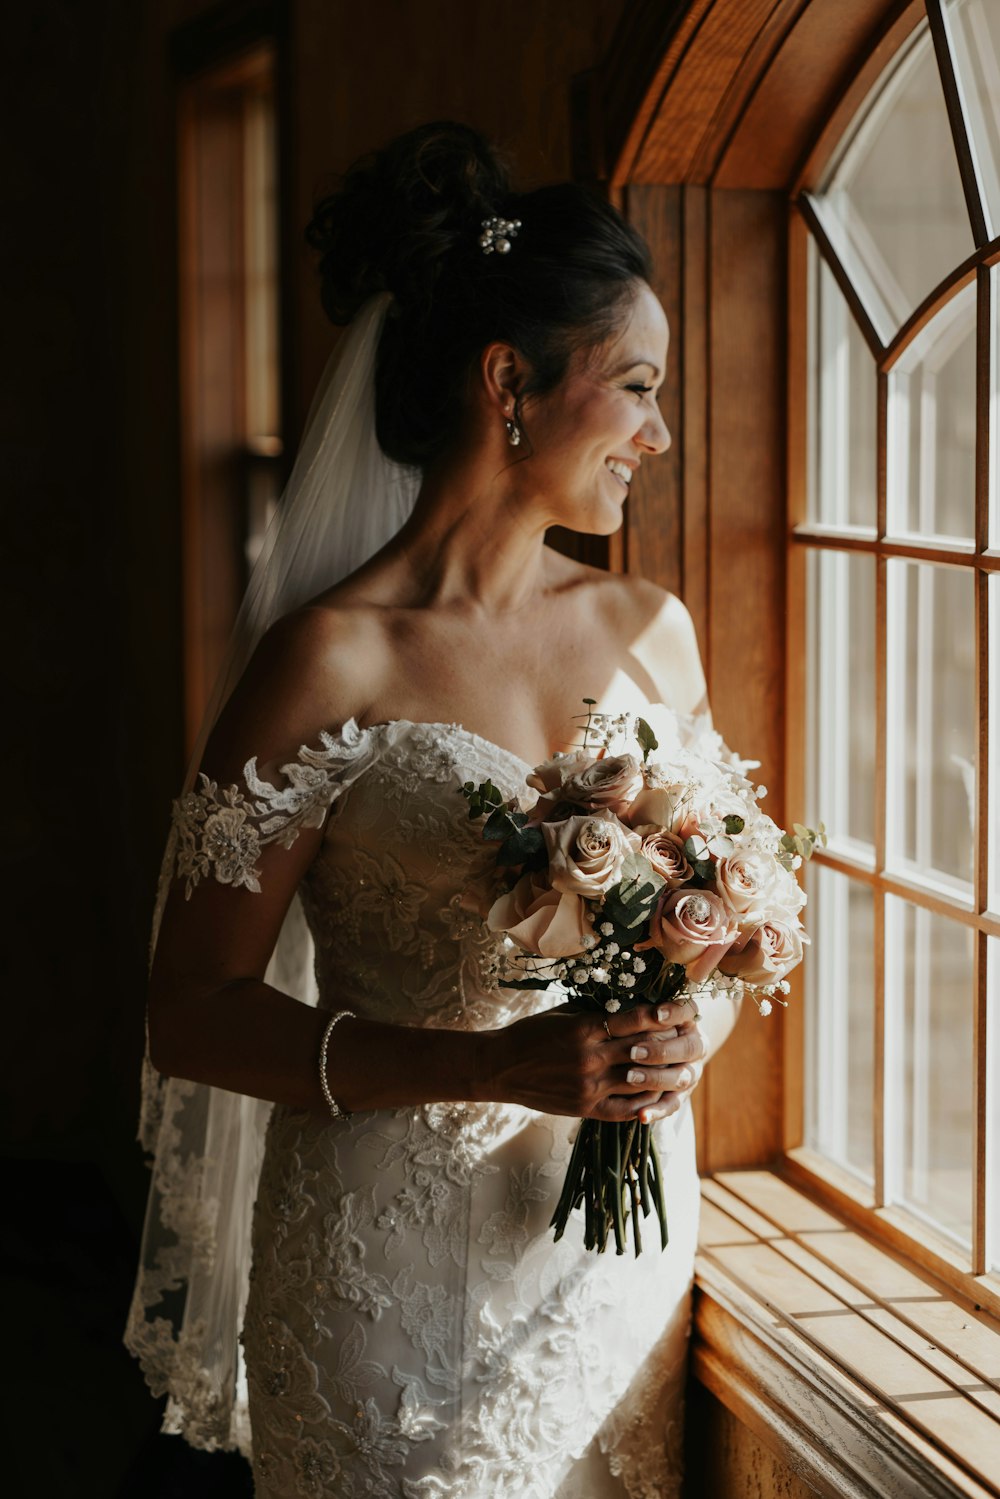 woman in white floral wedding dress holding bouquet of flowers